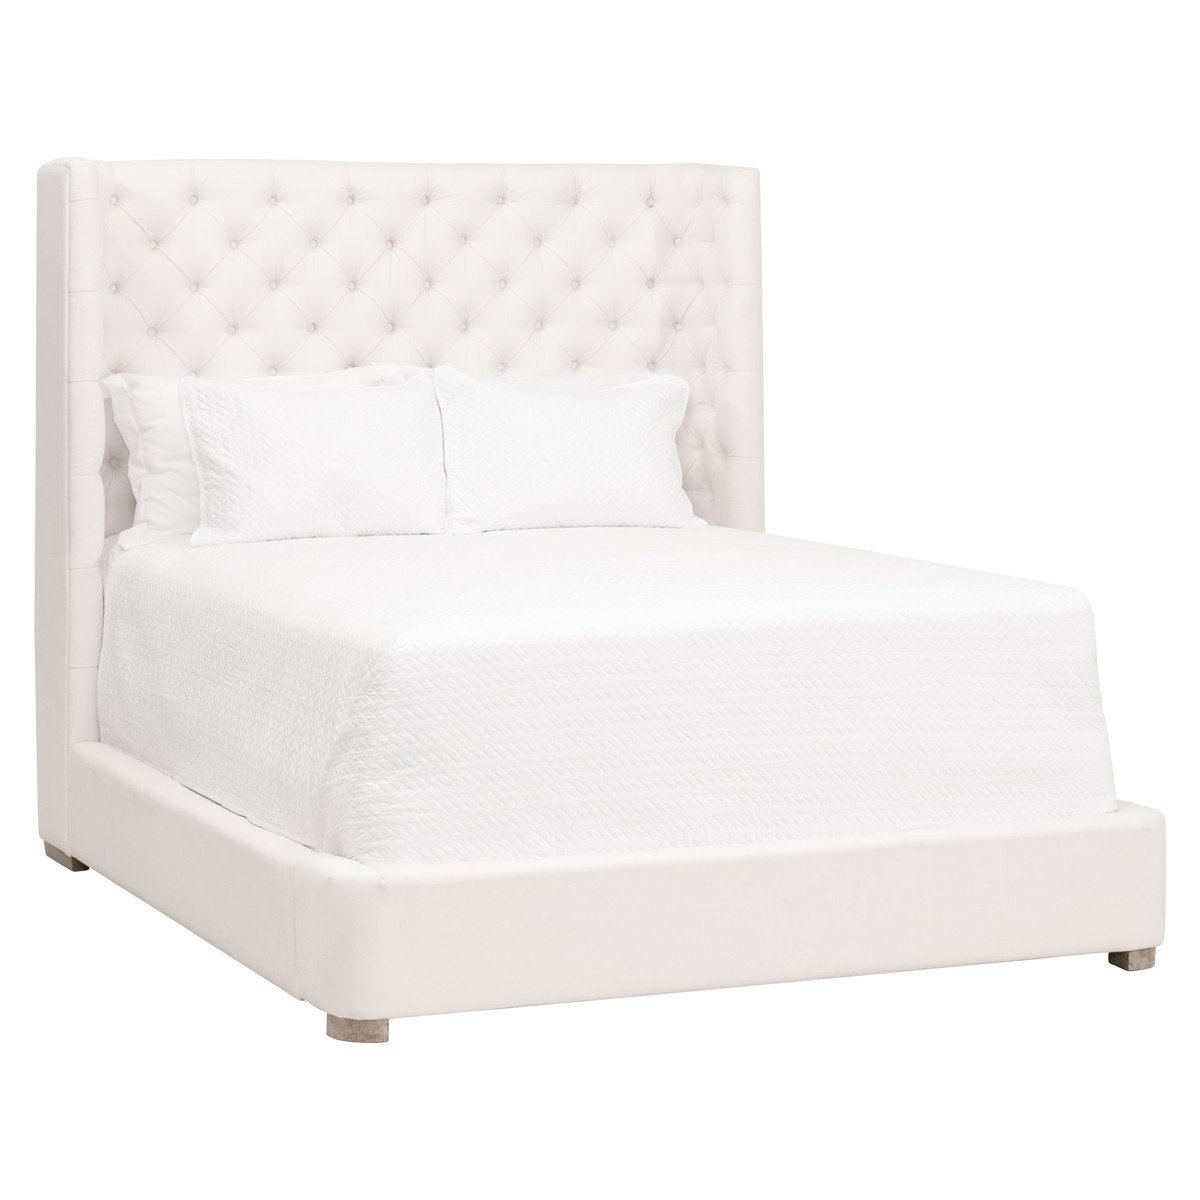 Barclay Standard King Bed - Image 1